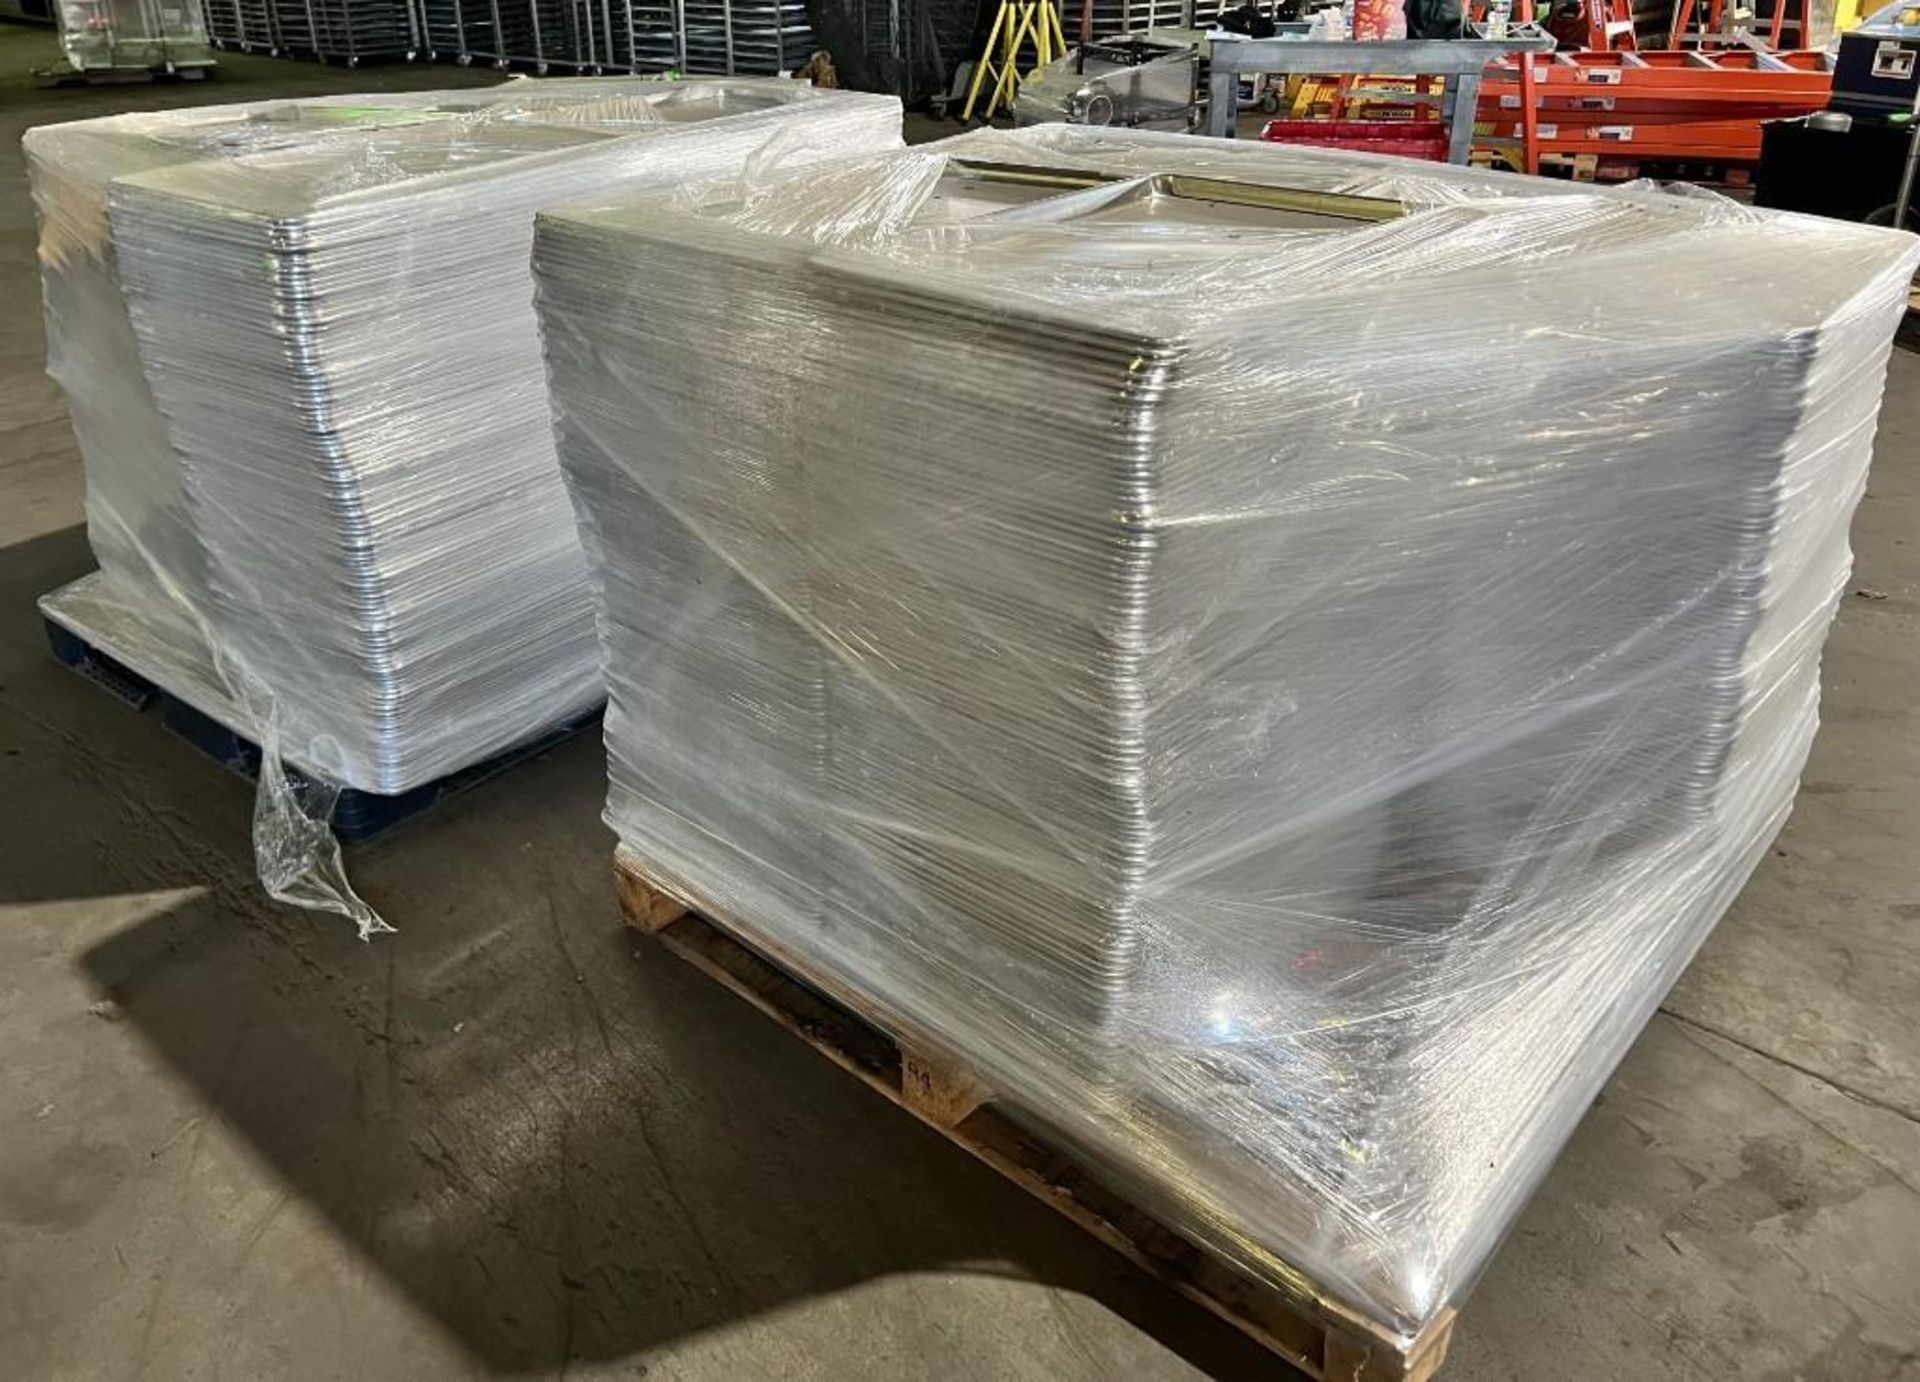 Lot Of Approximate 900 Stainless Steel Baking Pans. Approximate 17" x 25" x 1" deep. - Image 3 of 5